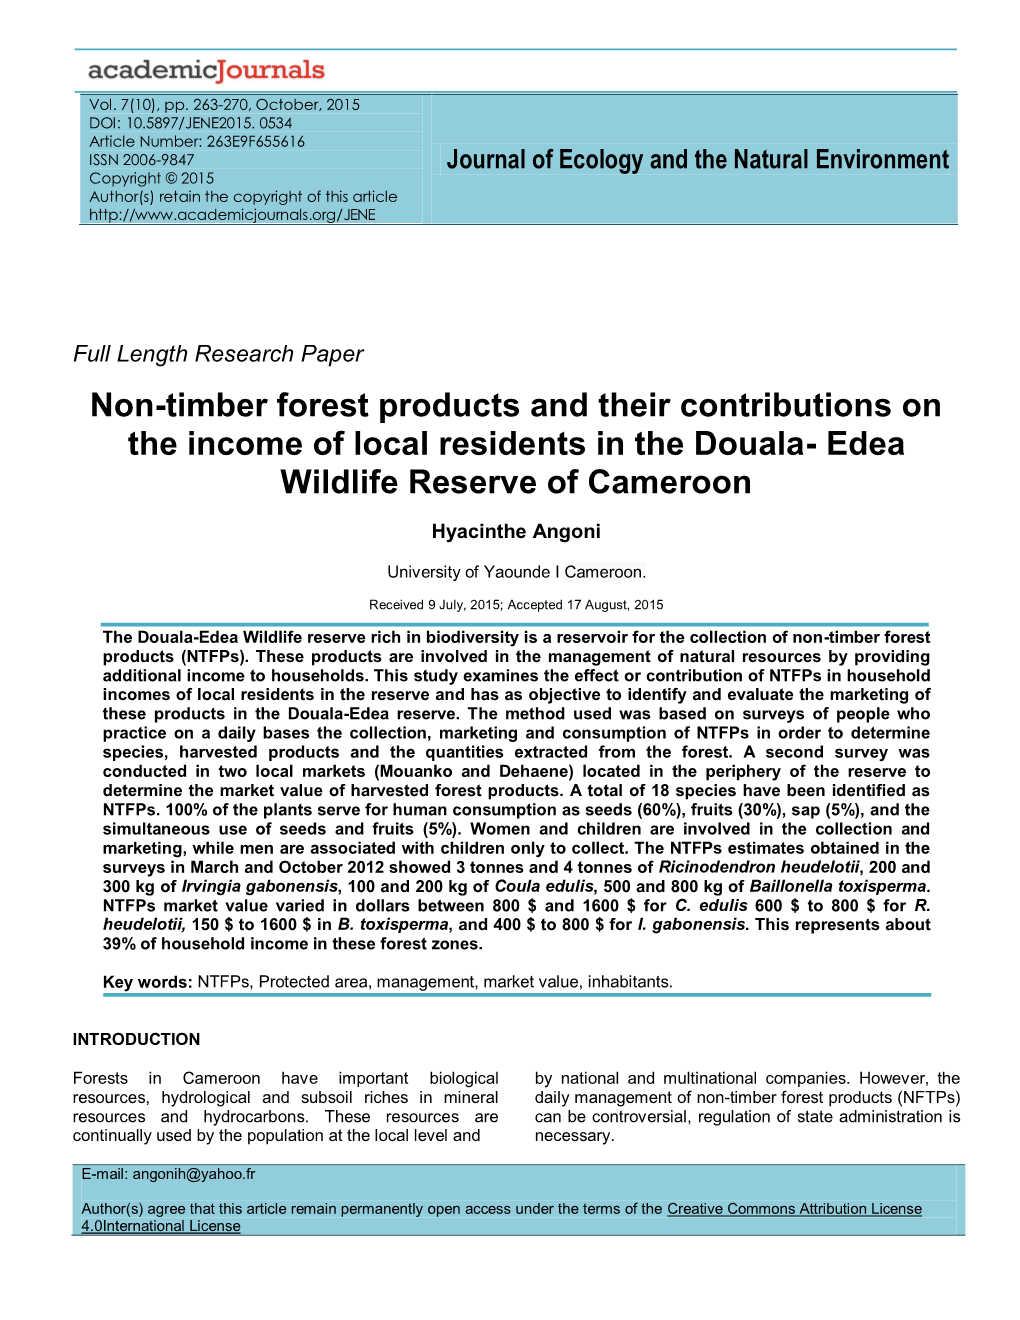 Non-Timber Forest Products and Their Contributions on the Income of Local Residents in the Douala- Edea Wildlife Reserve of Cameroon